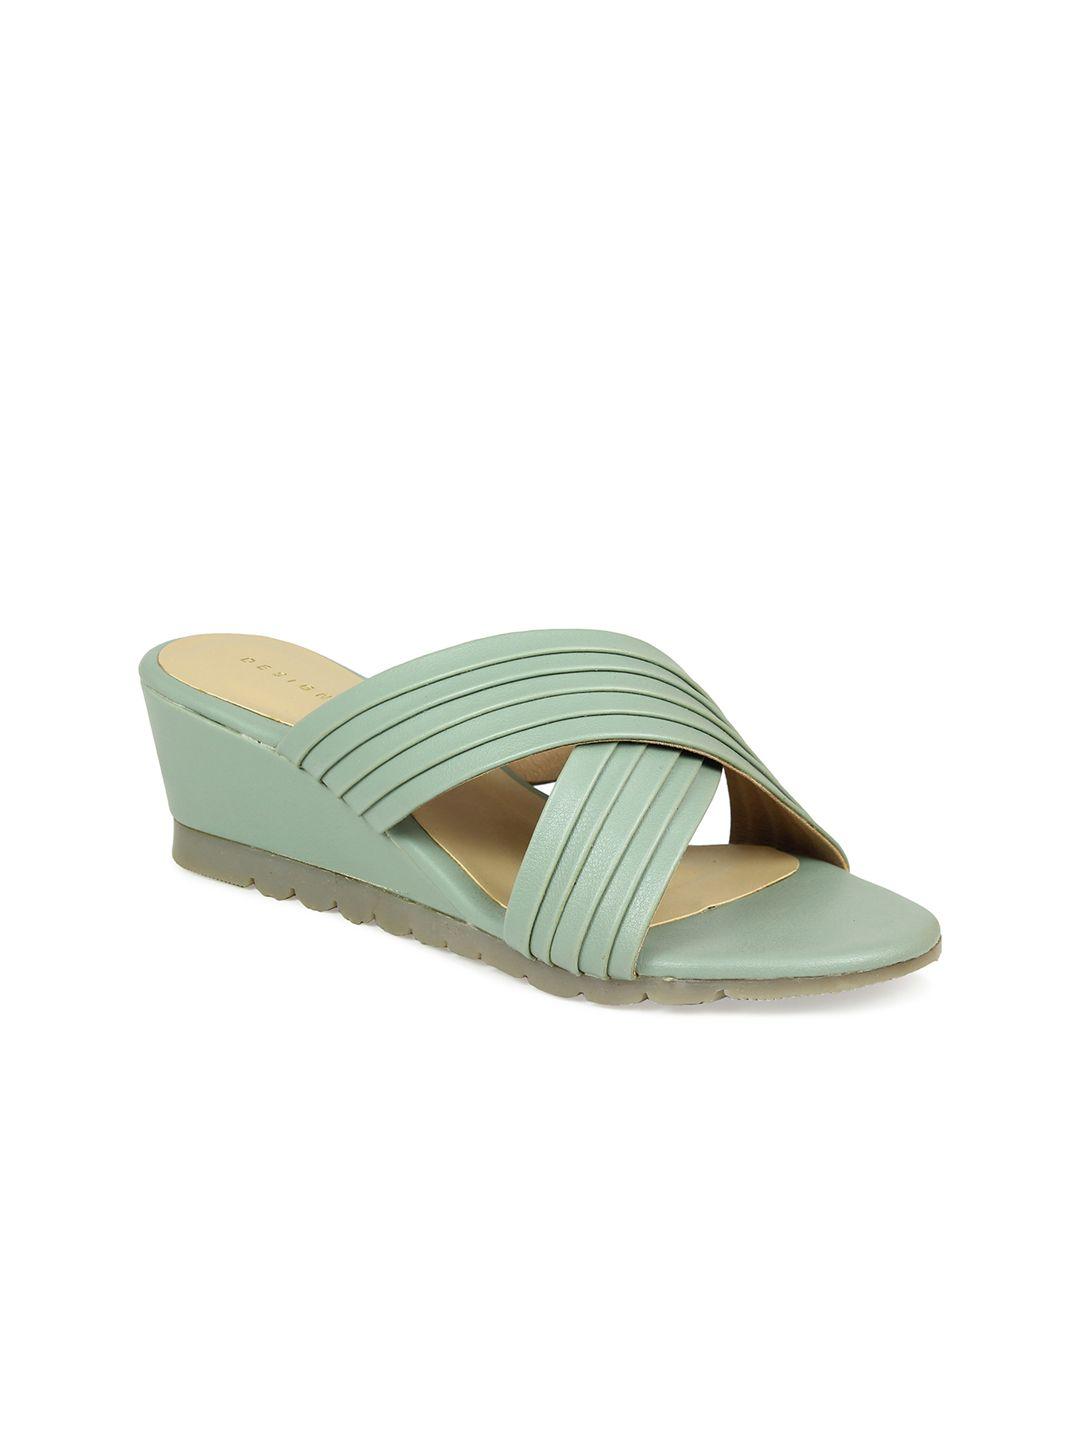 design crew mint green solid wedge mules